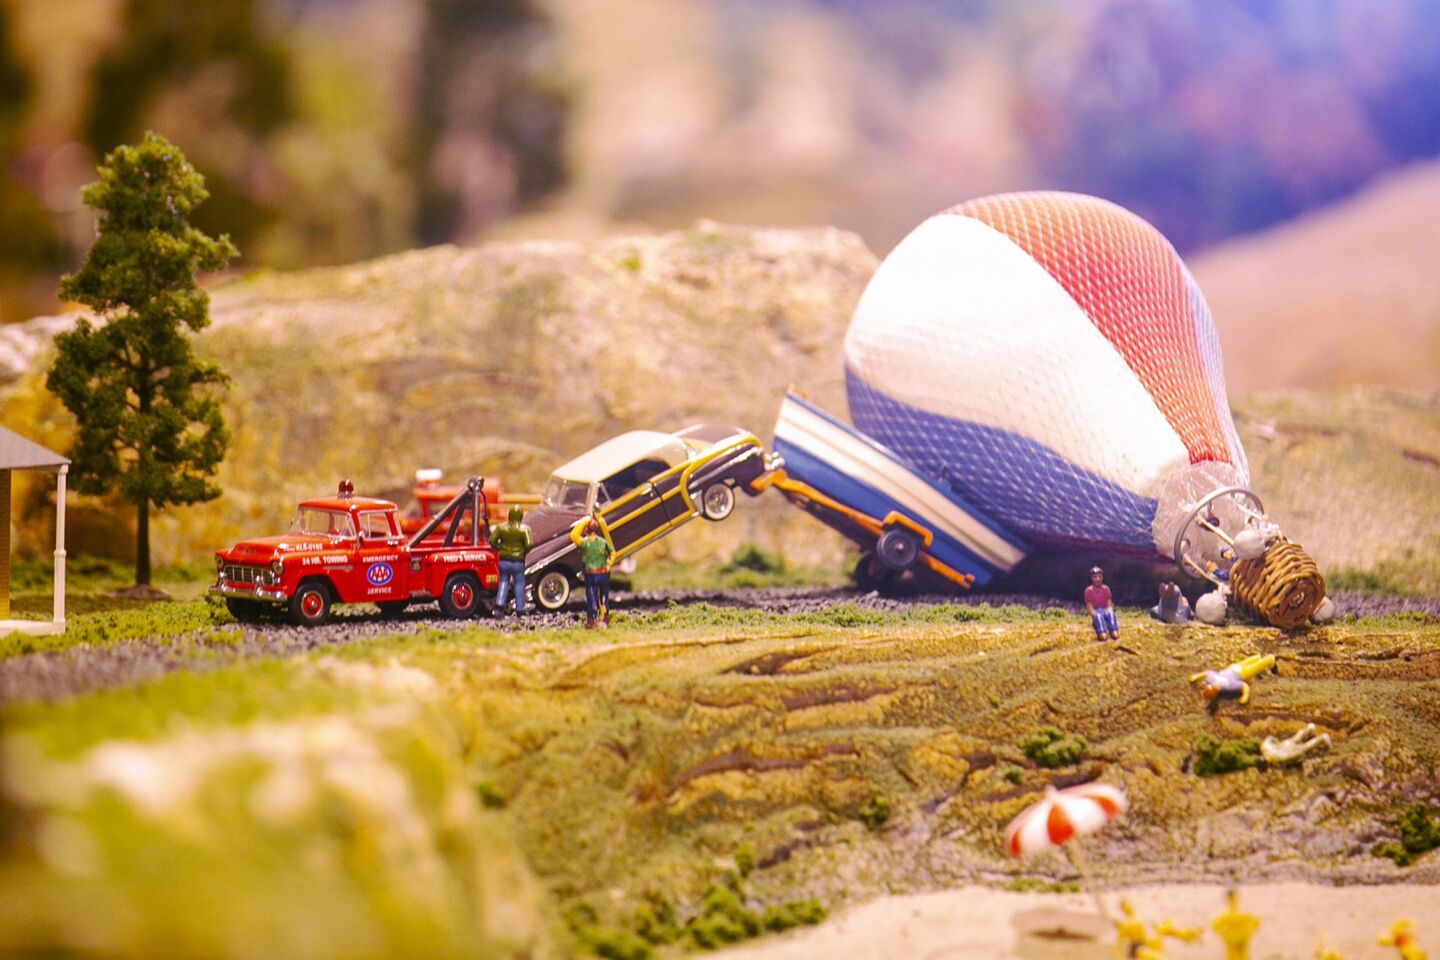 David Lizerbram and his wife Mana Monzavi took over the Old Town Model Railroad Depot, which was in danger of closing. The extensive train layout and its detailed and sometimes humorous dioramas was photographed on Friday, Dec. 13, 2019, at its Old Town, San Diego location. Looks like a bad end to a balloon ride and a vacation at the lake.